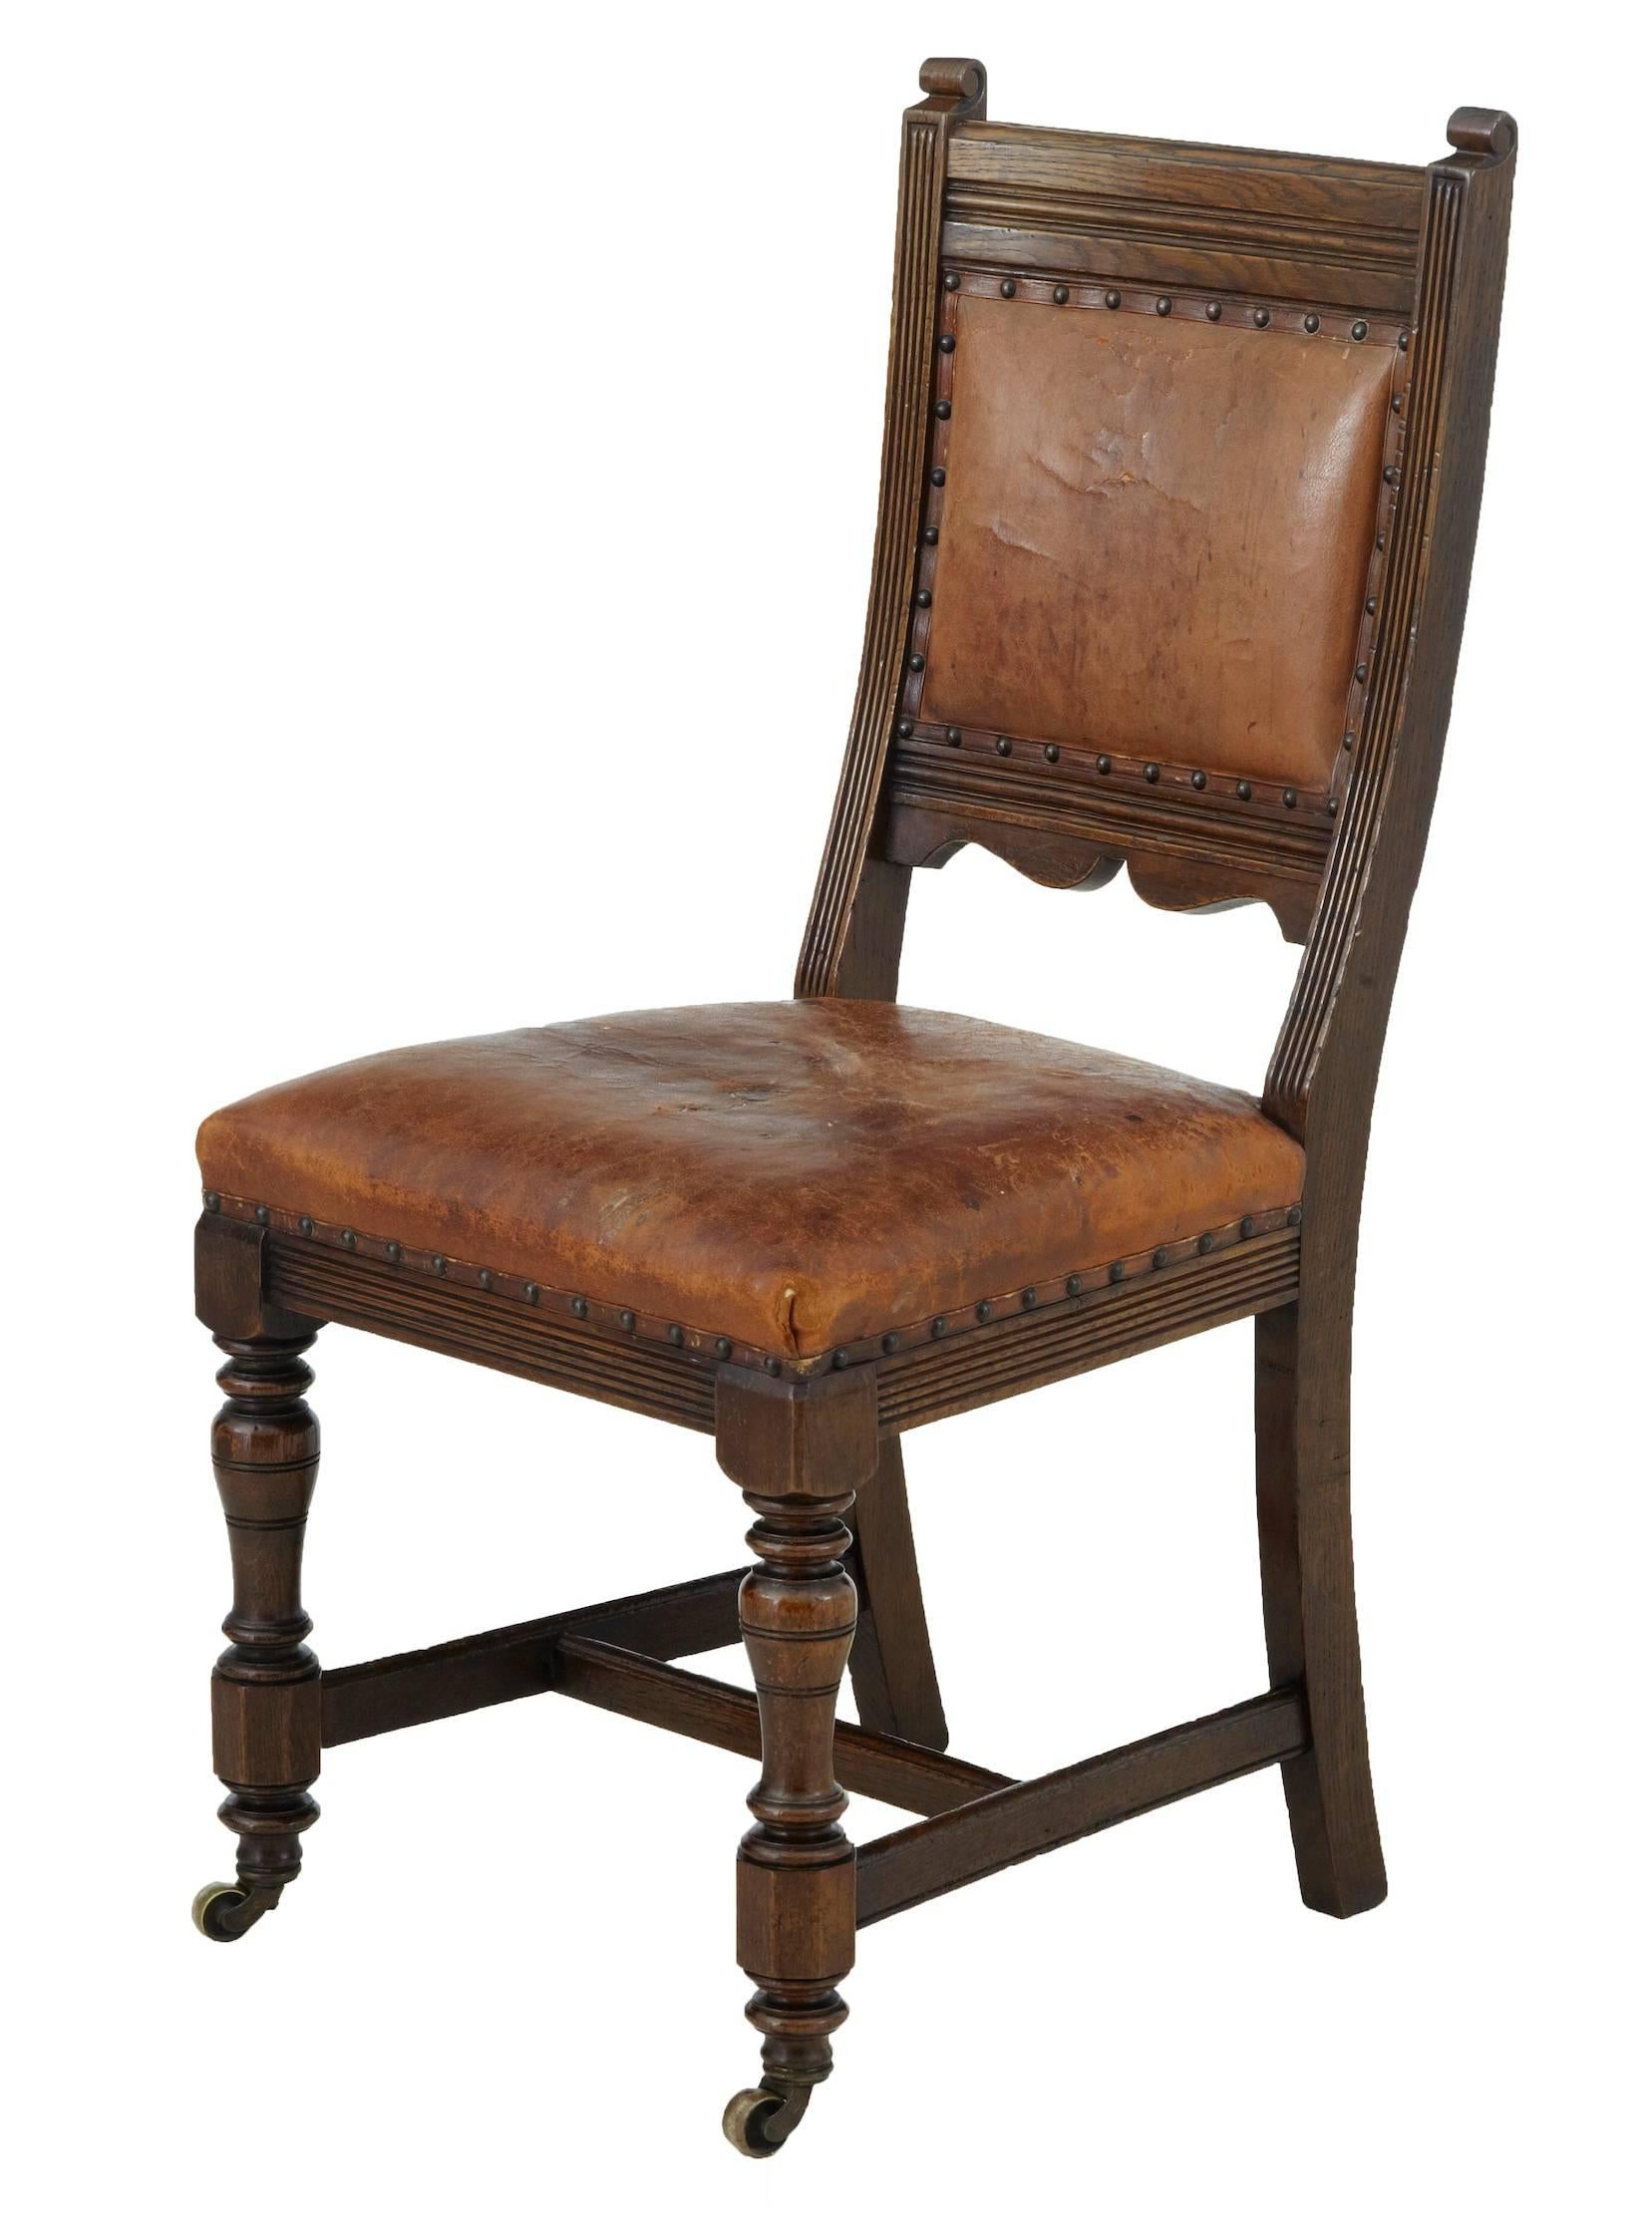 Good quality set of oak dining chairs in the manner of lambs of Manchester, circa 1890.
Turned front legs on brass castors. Fluted below the seat and on the backrest.
Good color and patina.
Original leather covering on the seats and backrest,